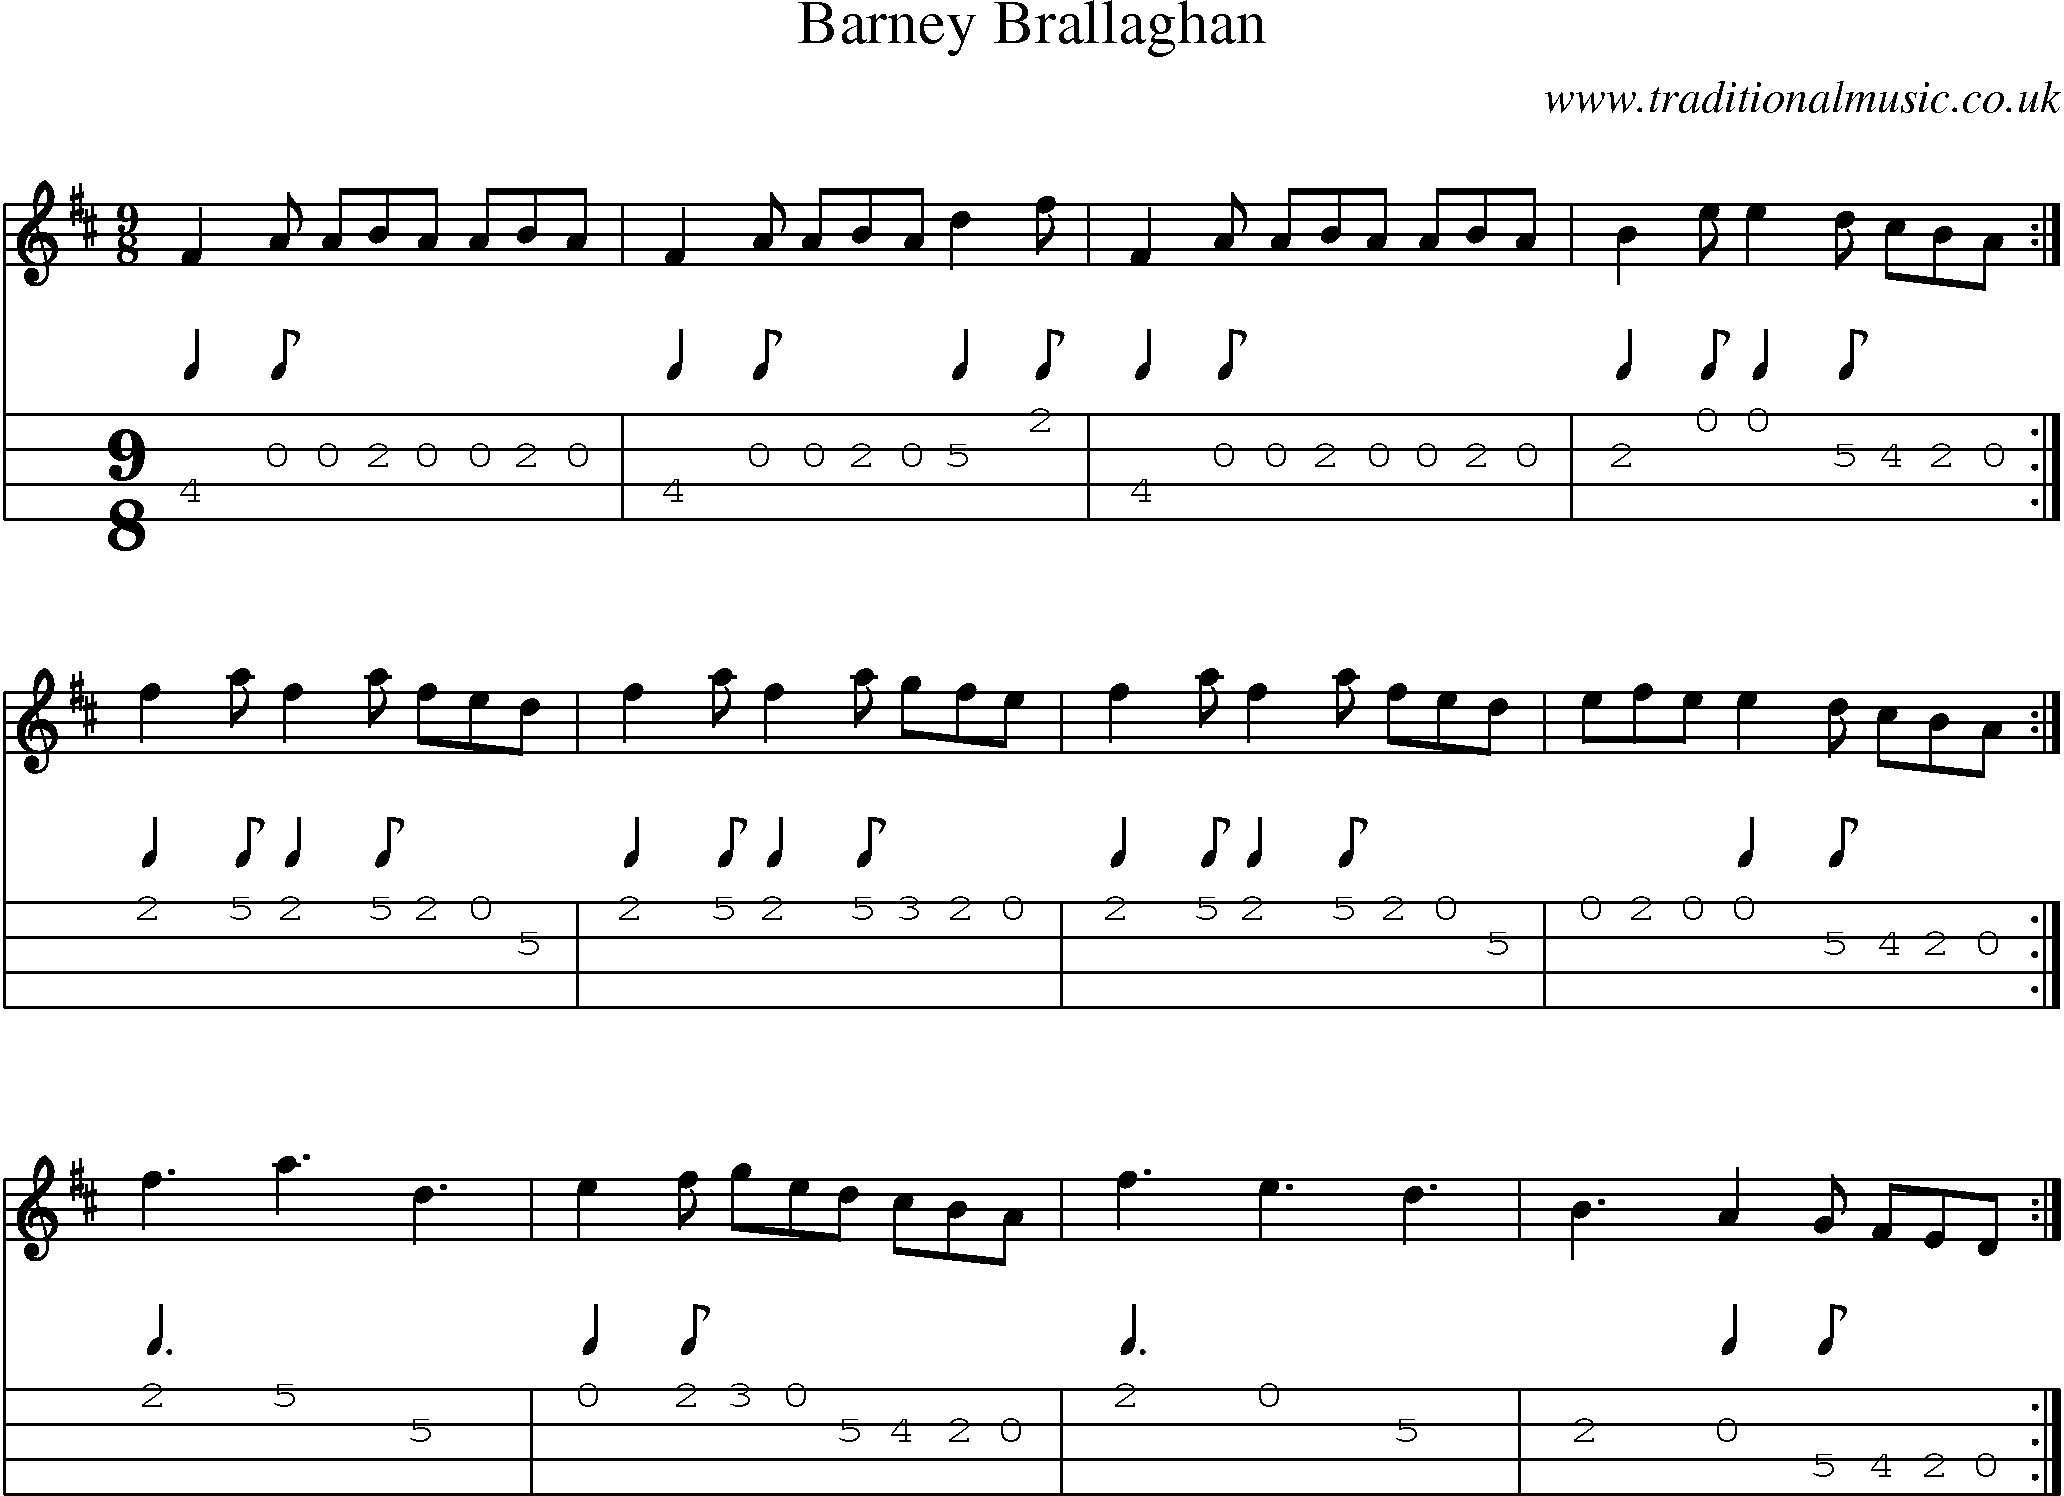 Music Score and Mandolin Tabs for Barney Brallaghan